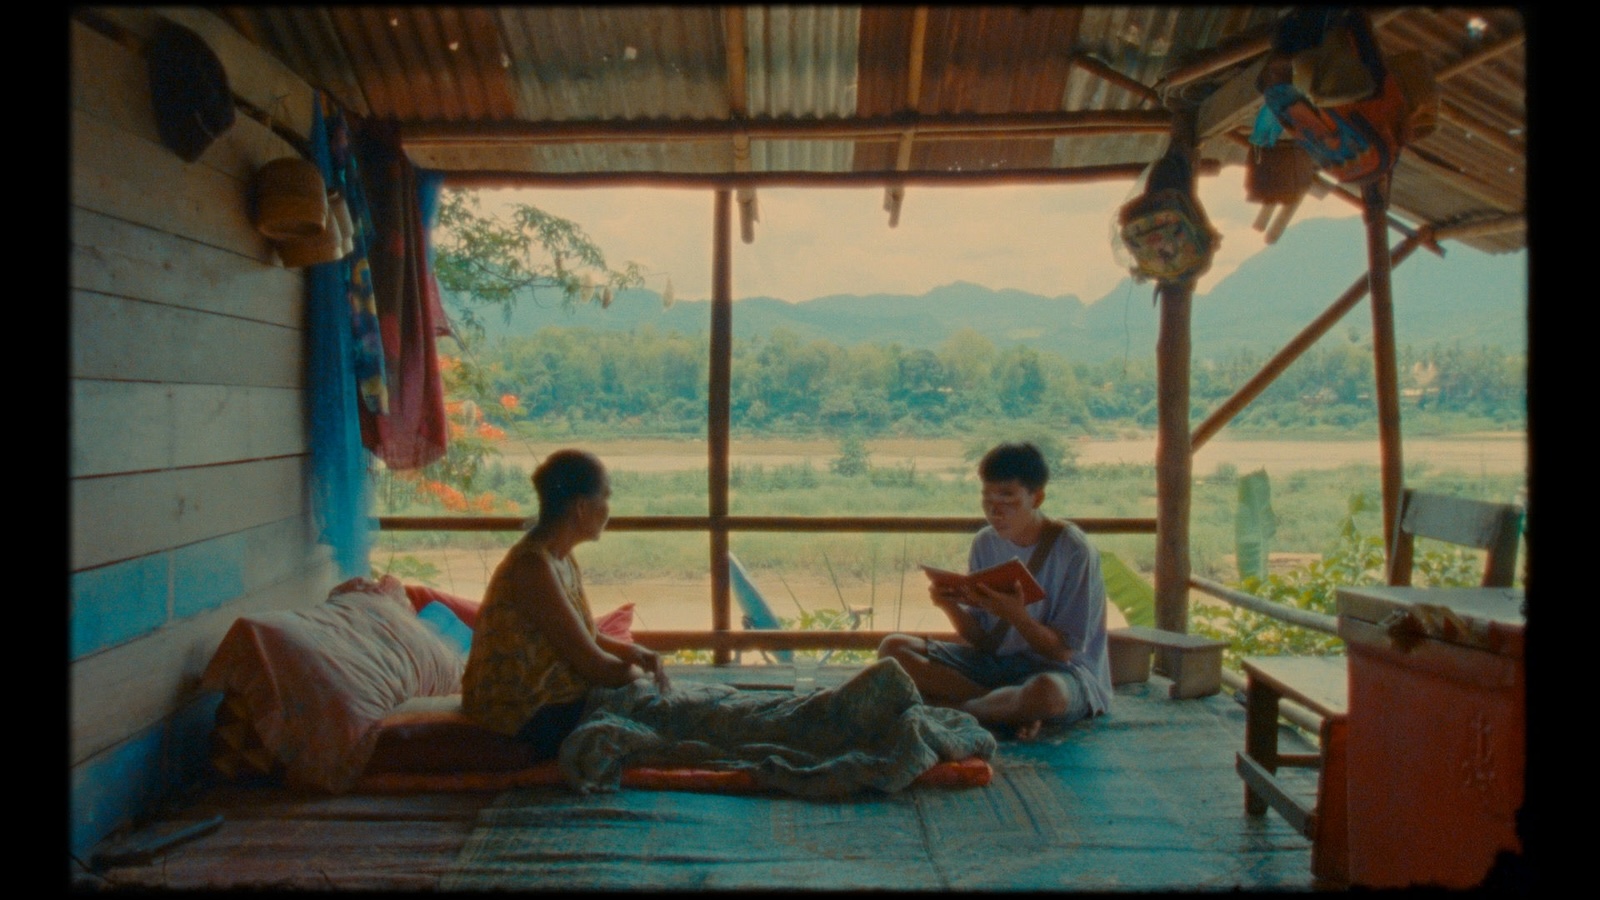 Two men sit in a porch against a bucolic, meditative atmosphere; one reads an open book to the other